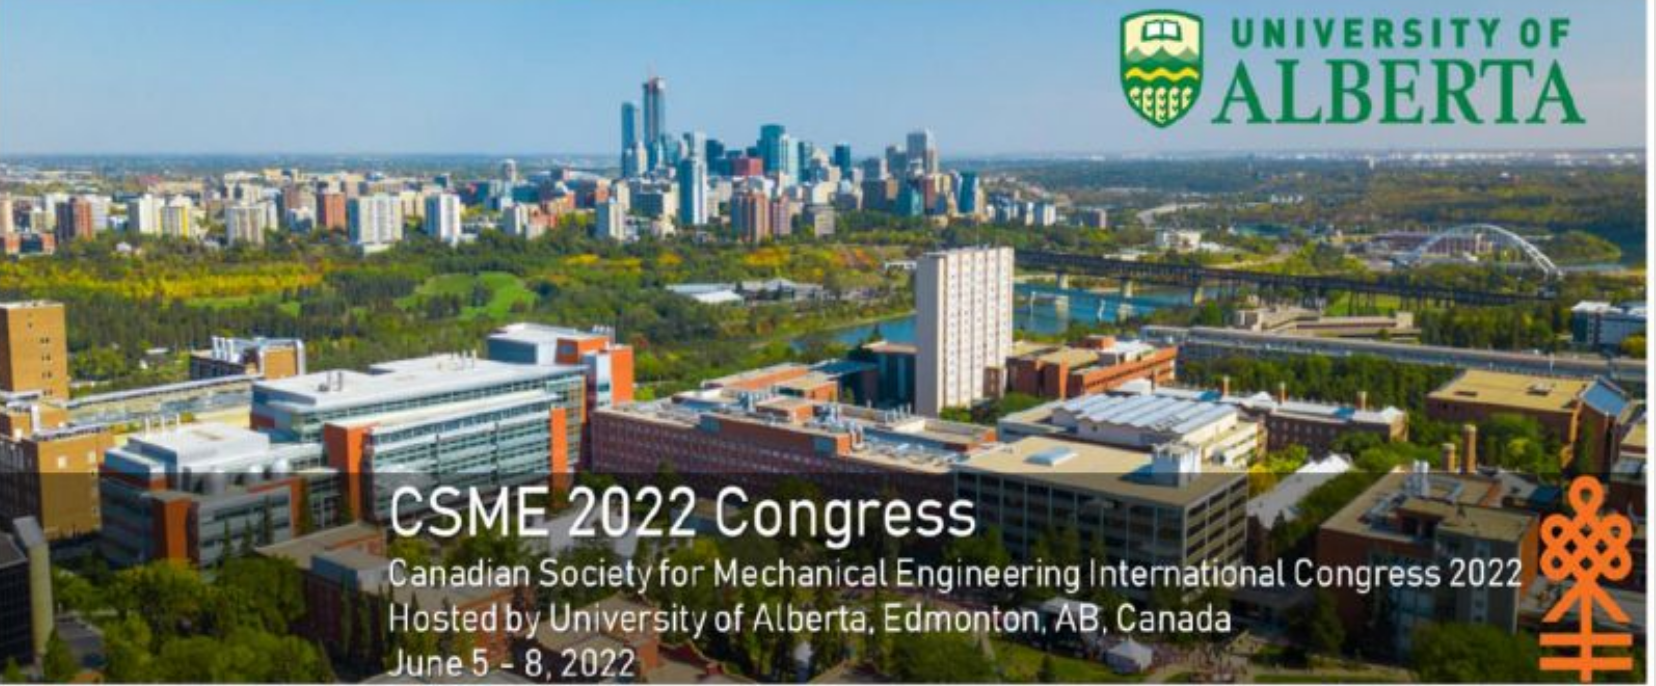 SFR is Proud to be a Bronze sponsor of the CSME Congress, June 5-8th